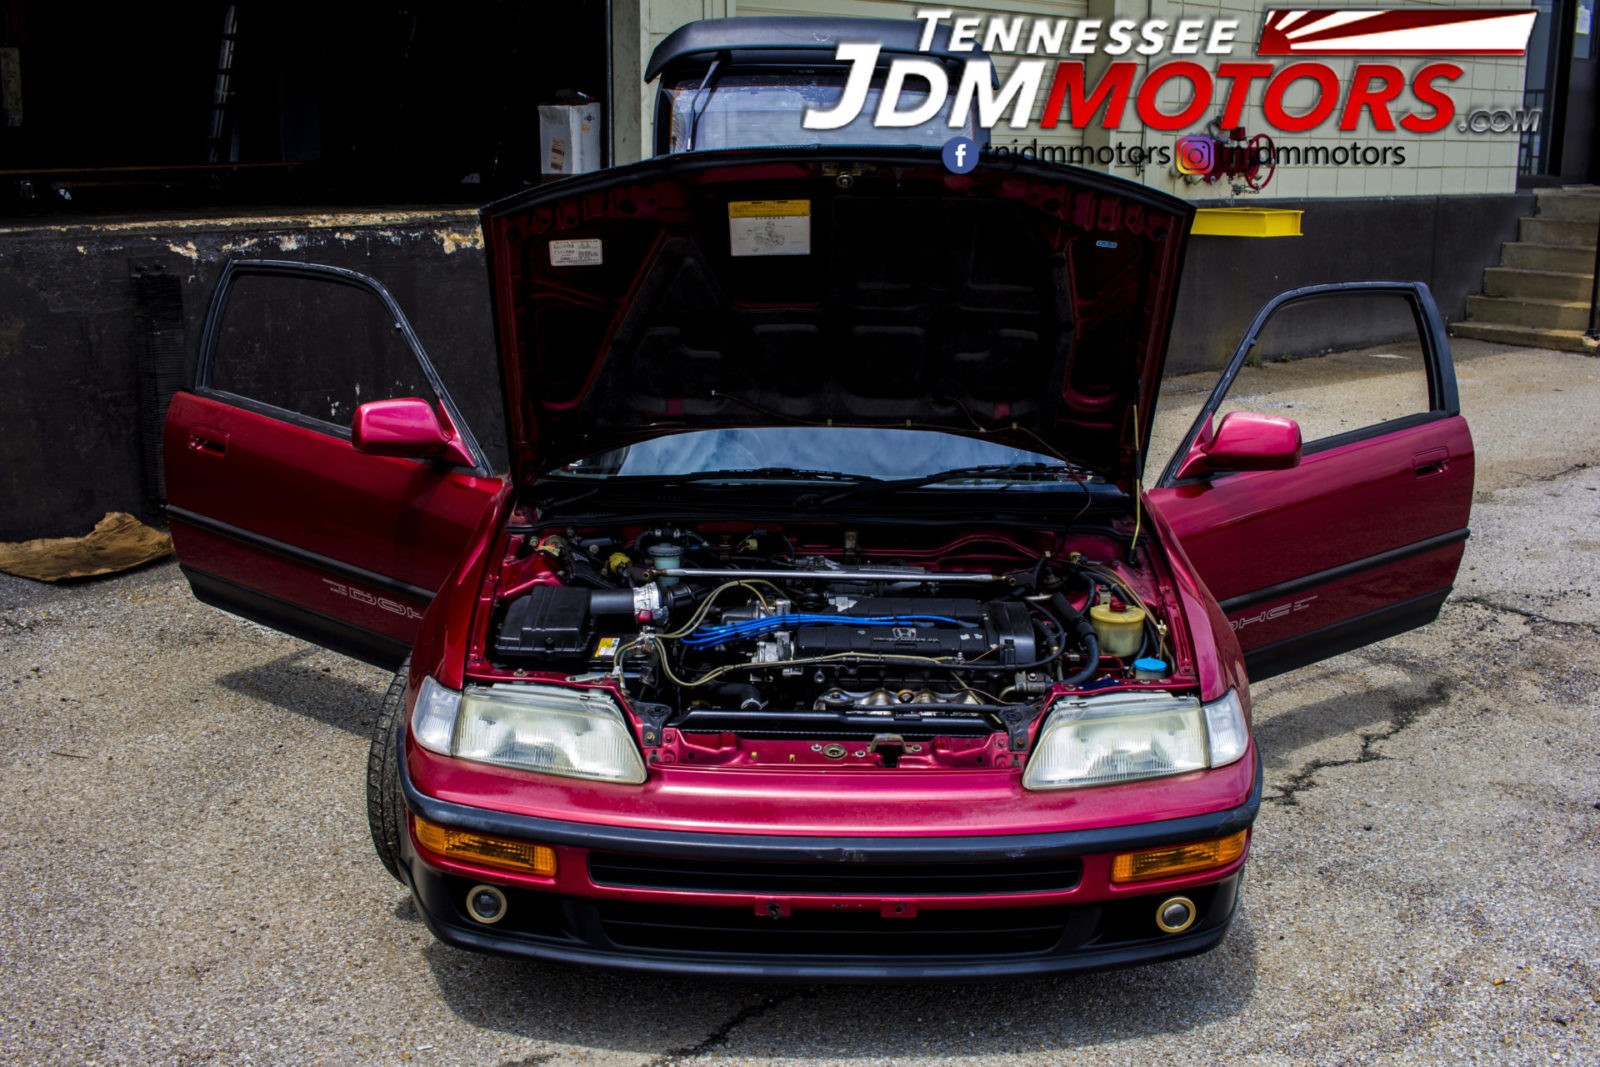 90s jdm cars for sale